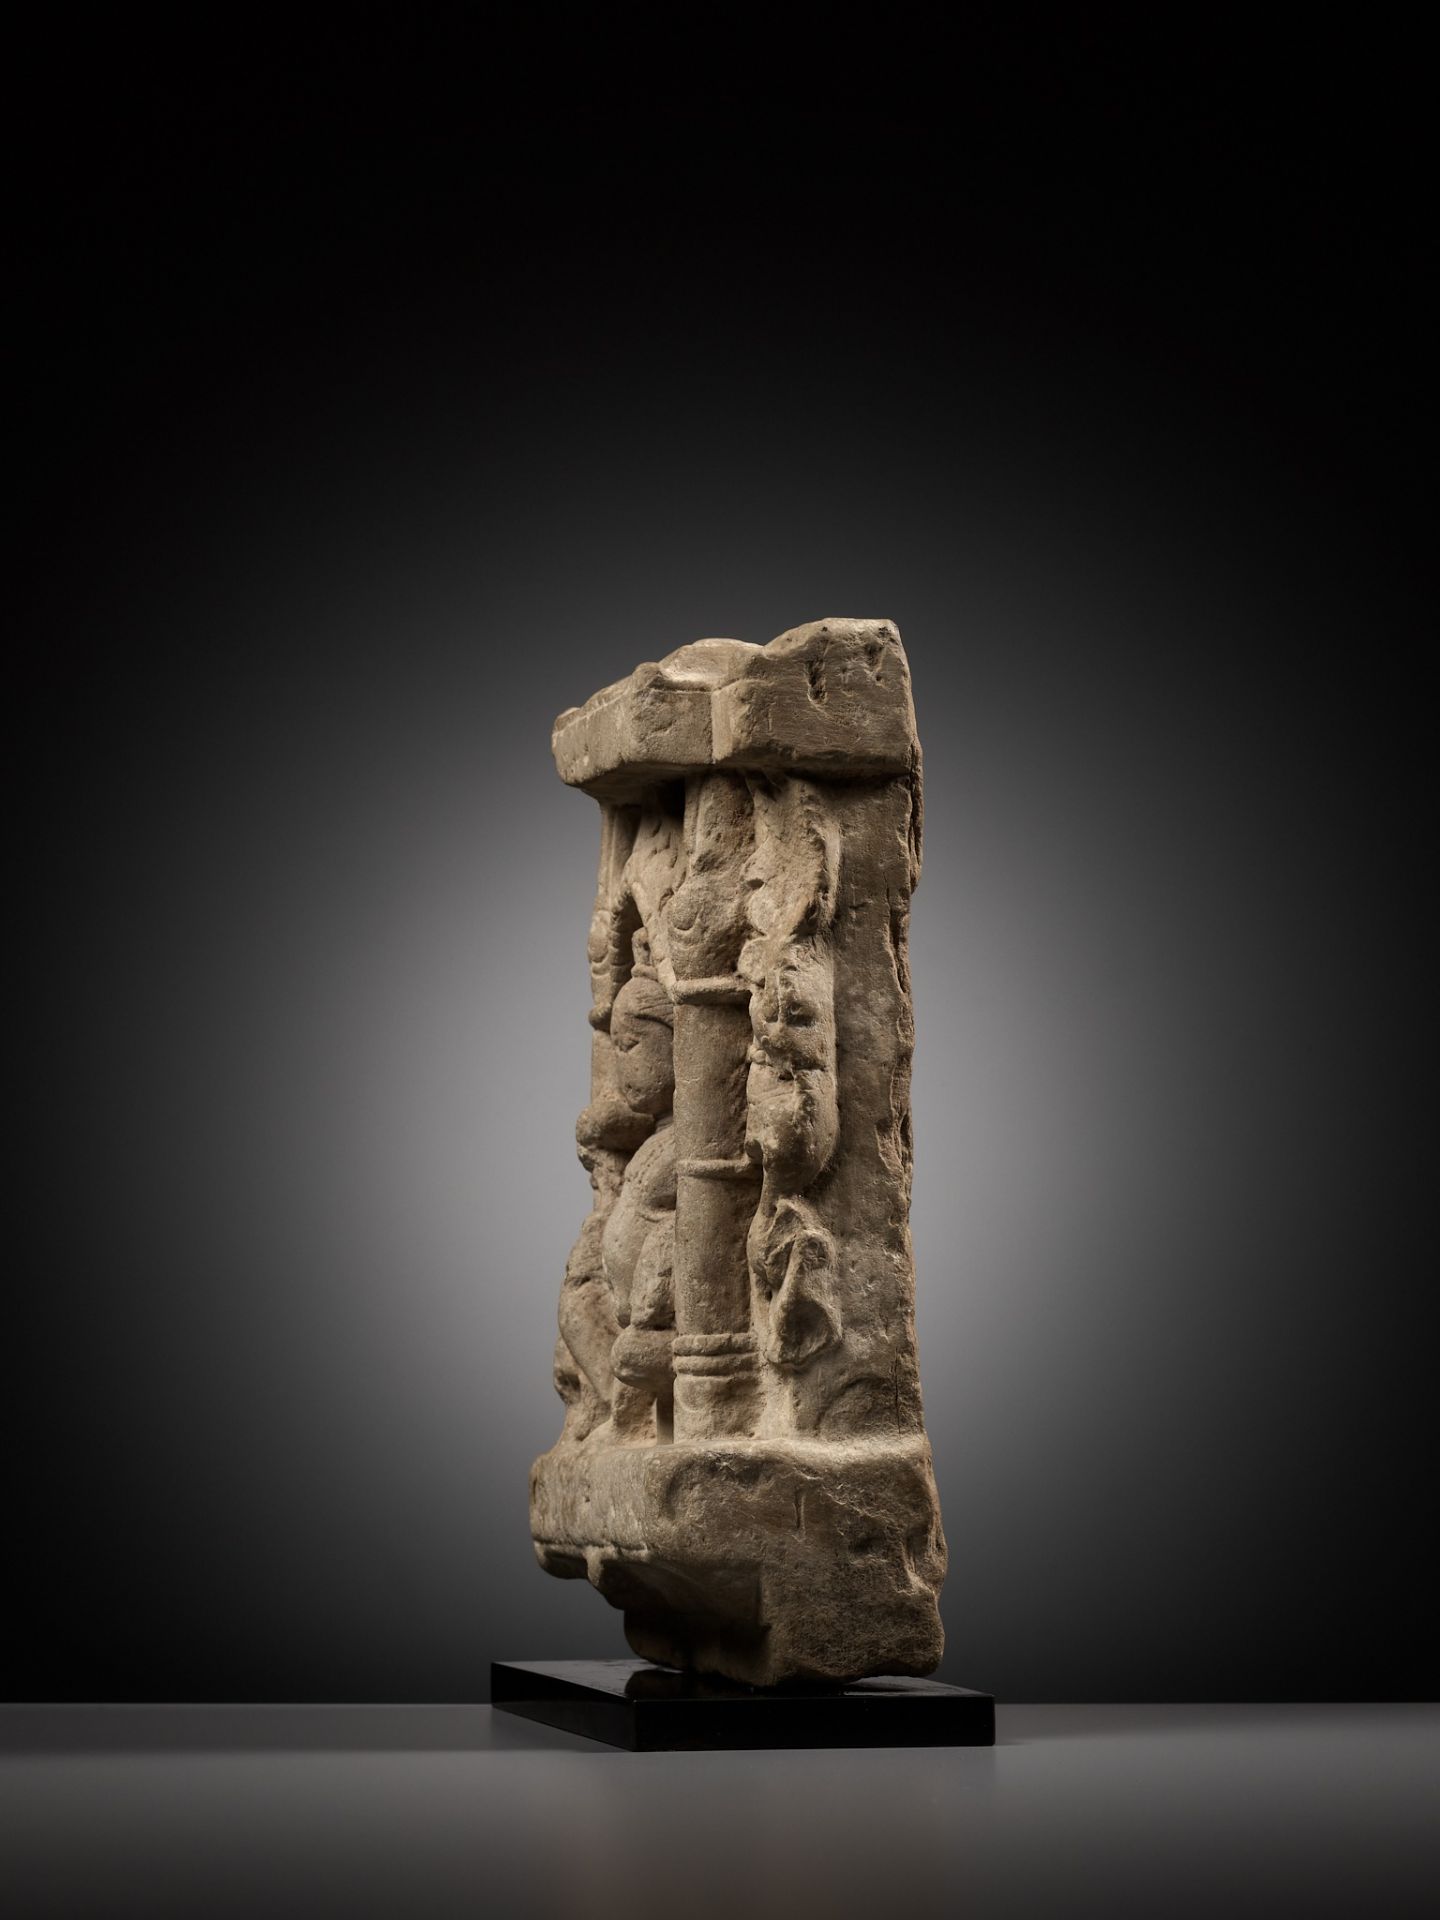 A SANDSTONE FRIEZE DEPICTING KUBERA, CENTRAL INDIA, 9TH-11TH CENTURY - Image 8 of 10